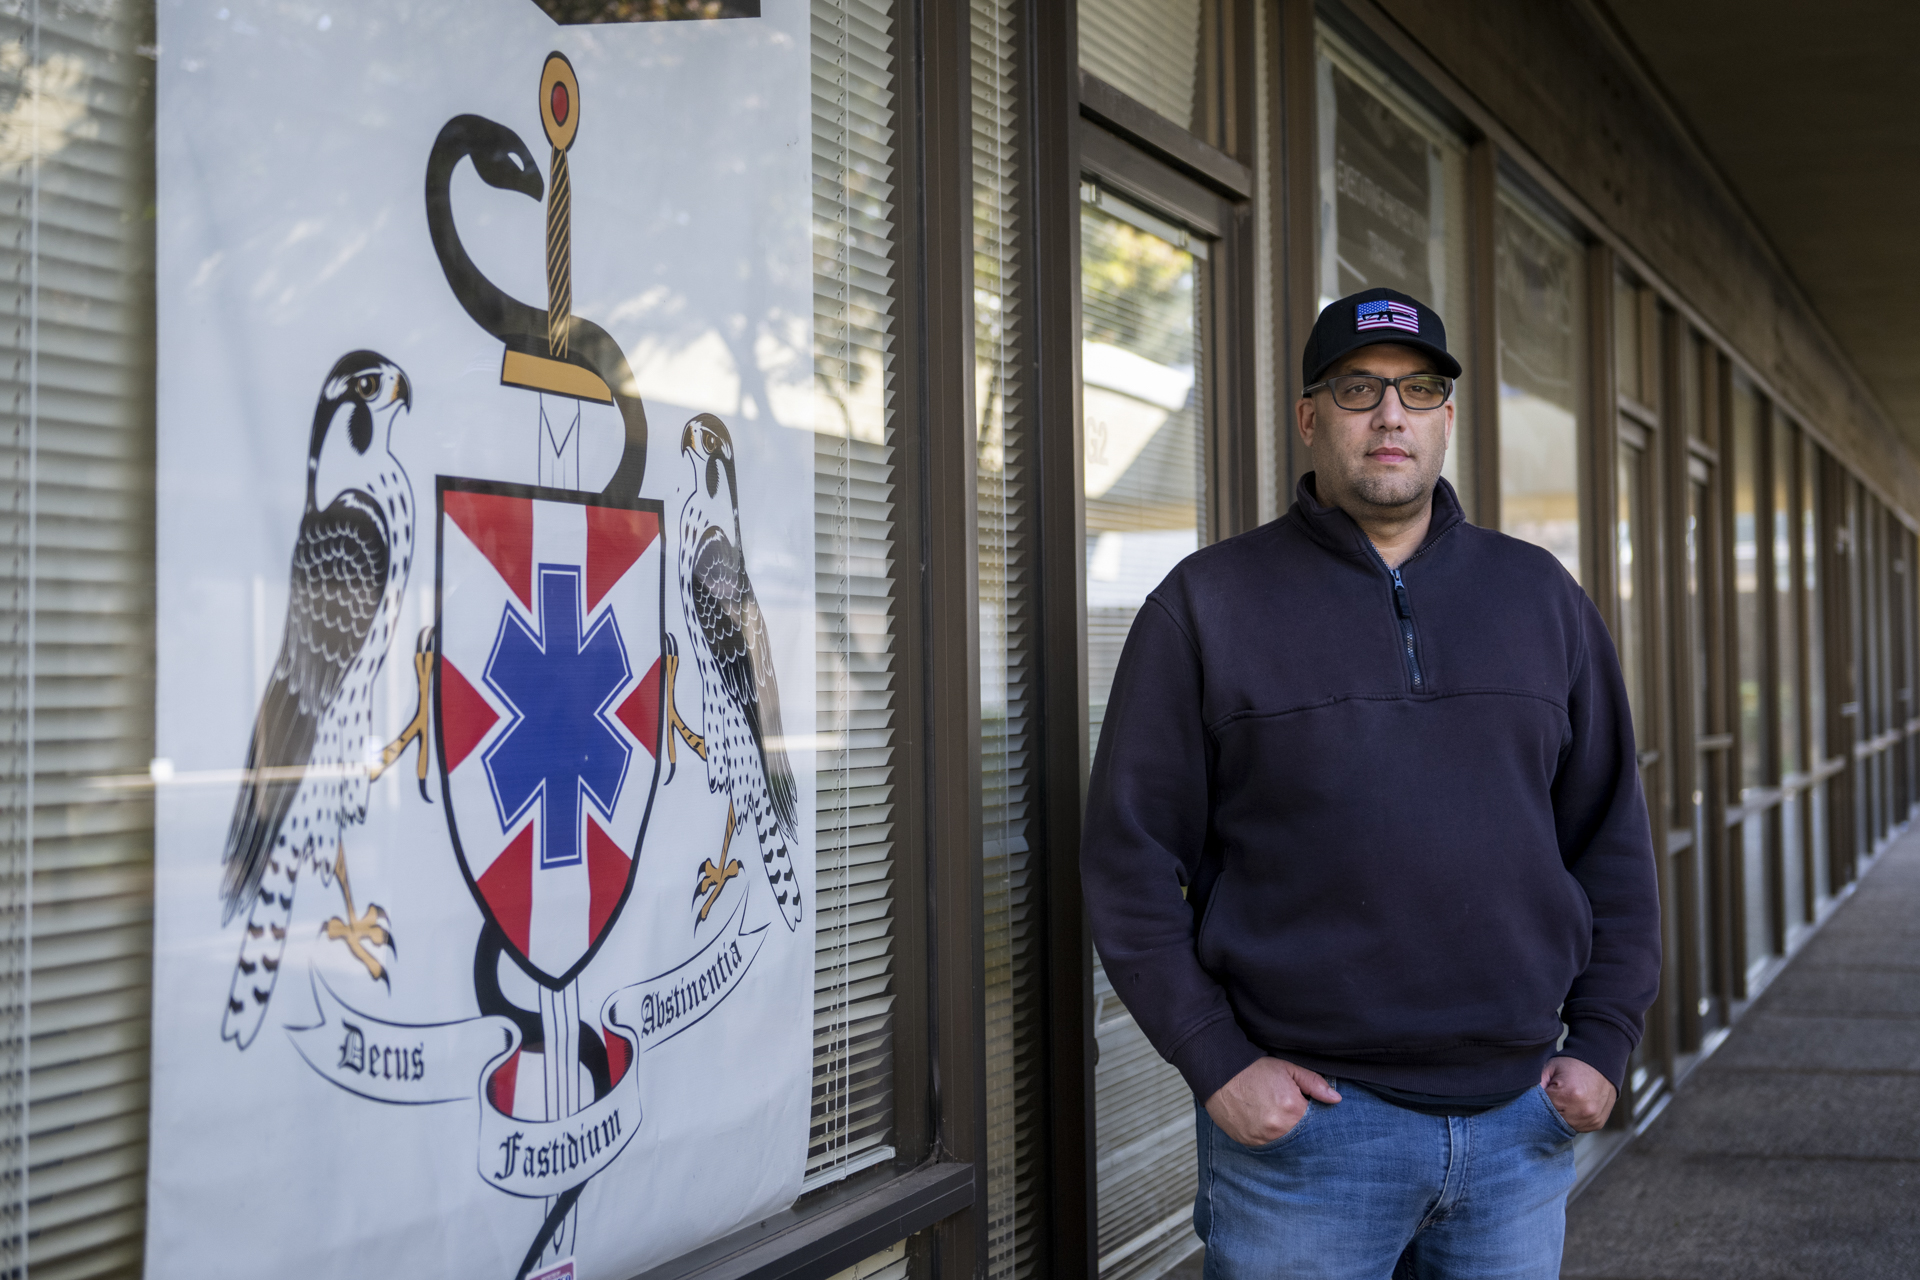 A white man looks seriously at the camera standing in front of a storefront at a strip mall next to a banner showing an insignia featuring a snake and two falcons. The man wears a black hat with an American flag, glasses, a dark fleece, and blue jeans.